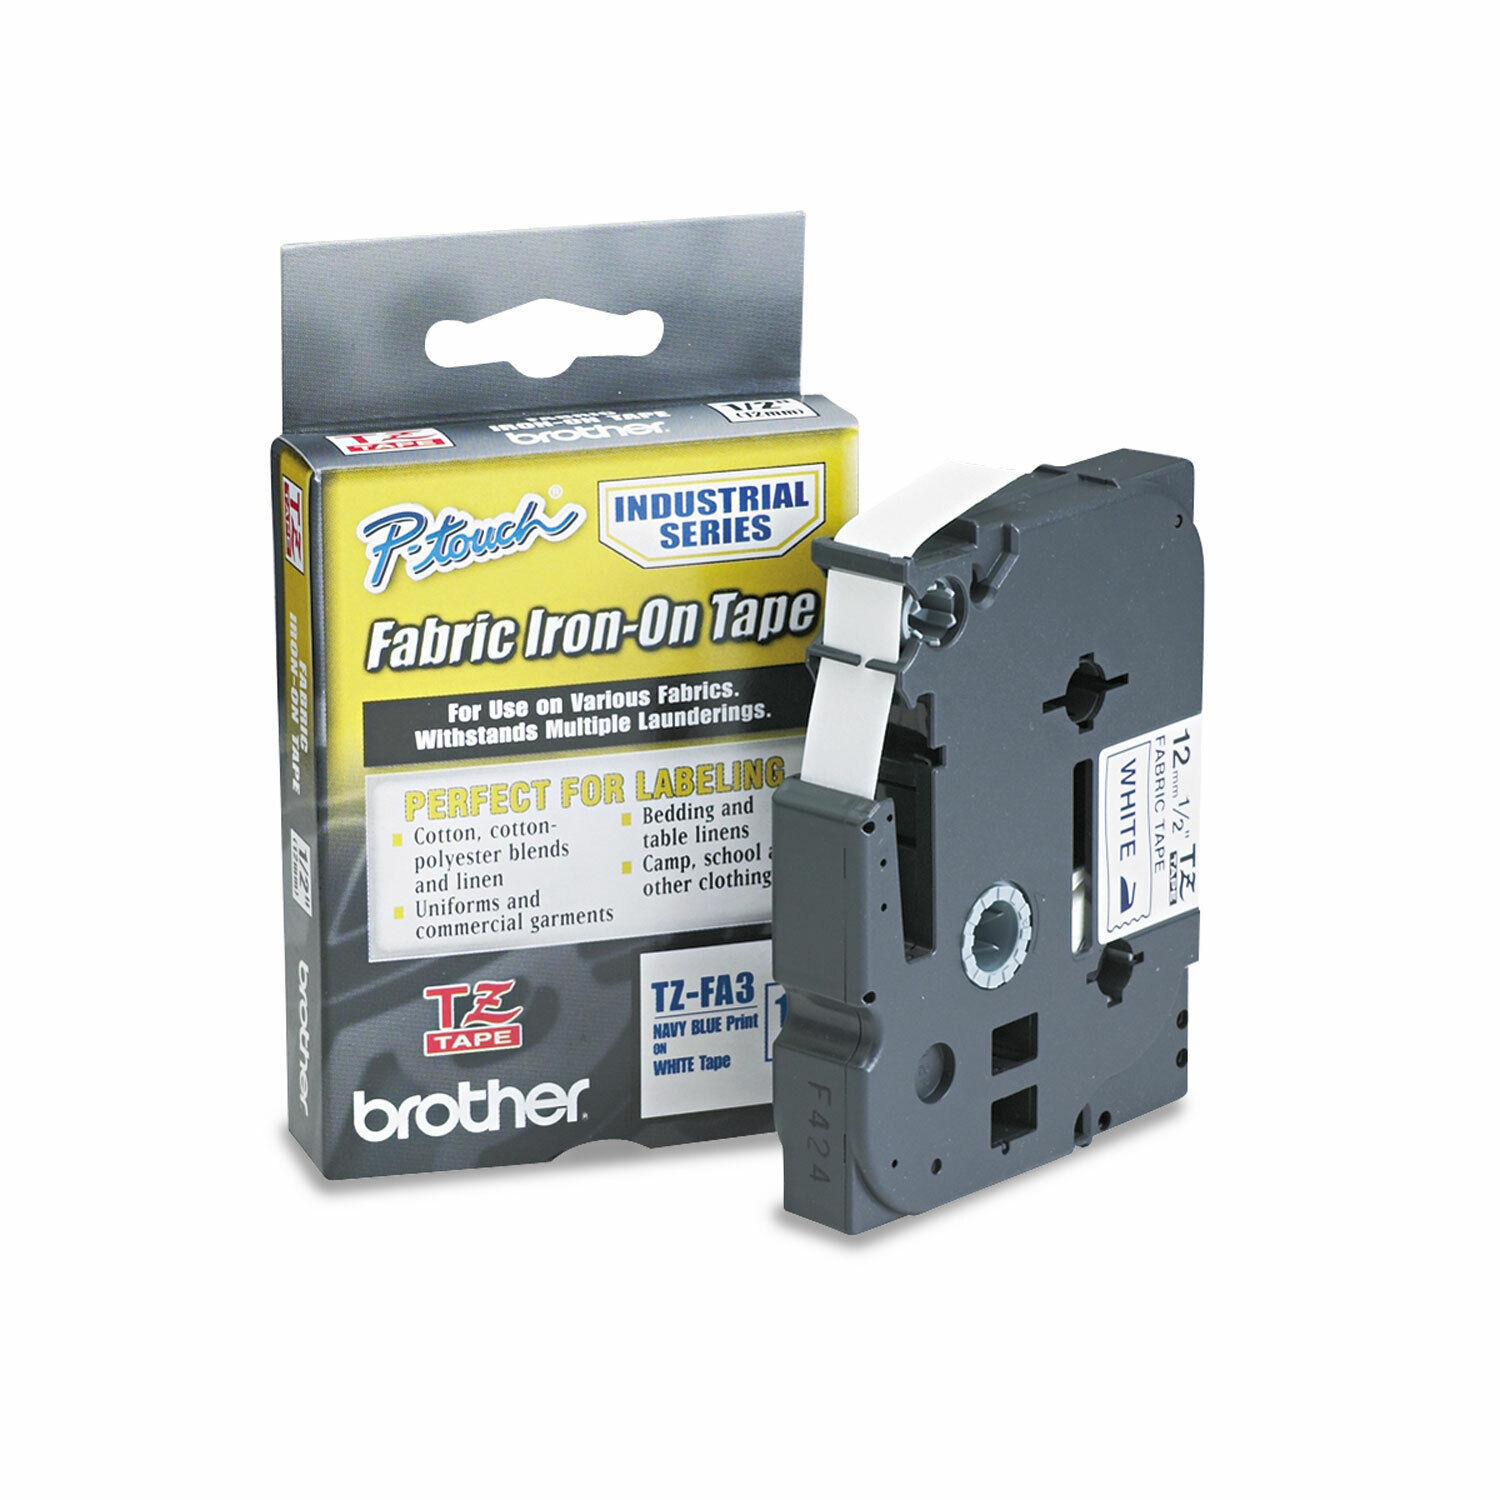 Brother TZ Industrial Series Fabric Iron-On Tape Navy-on-White 1/2 x 9.8ft